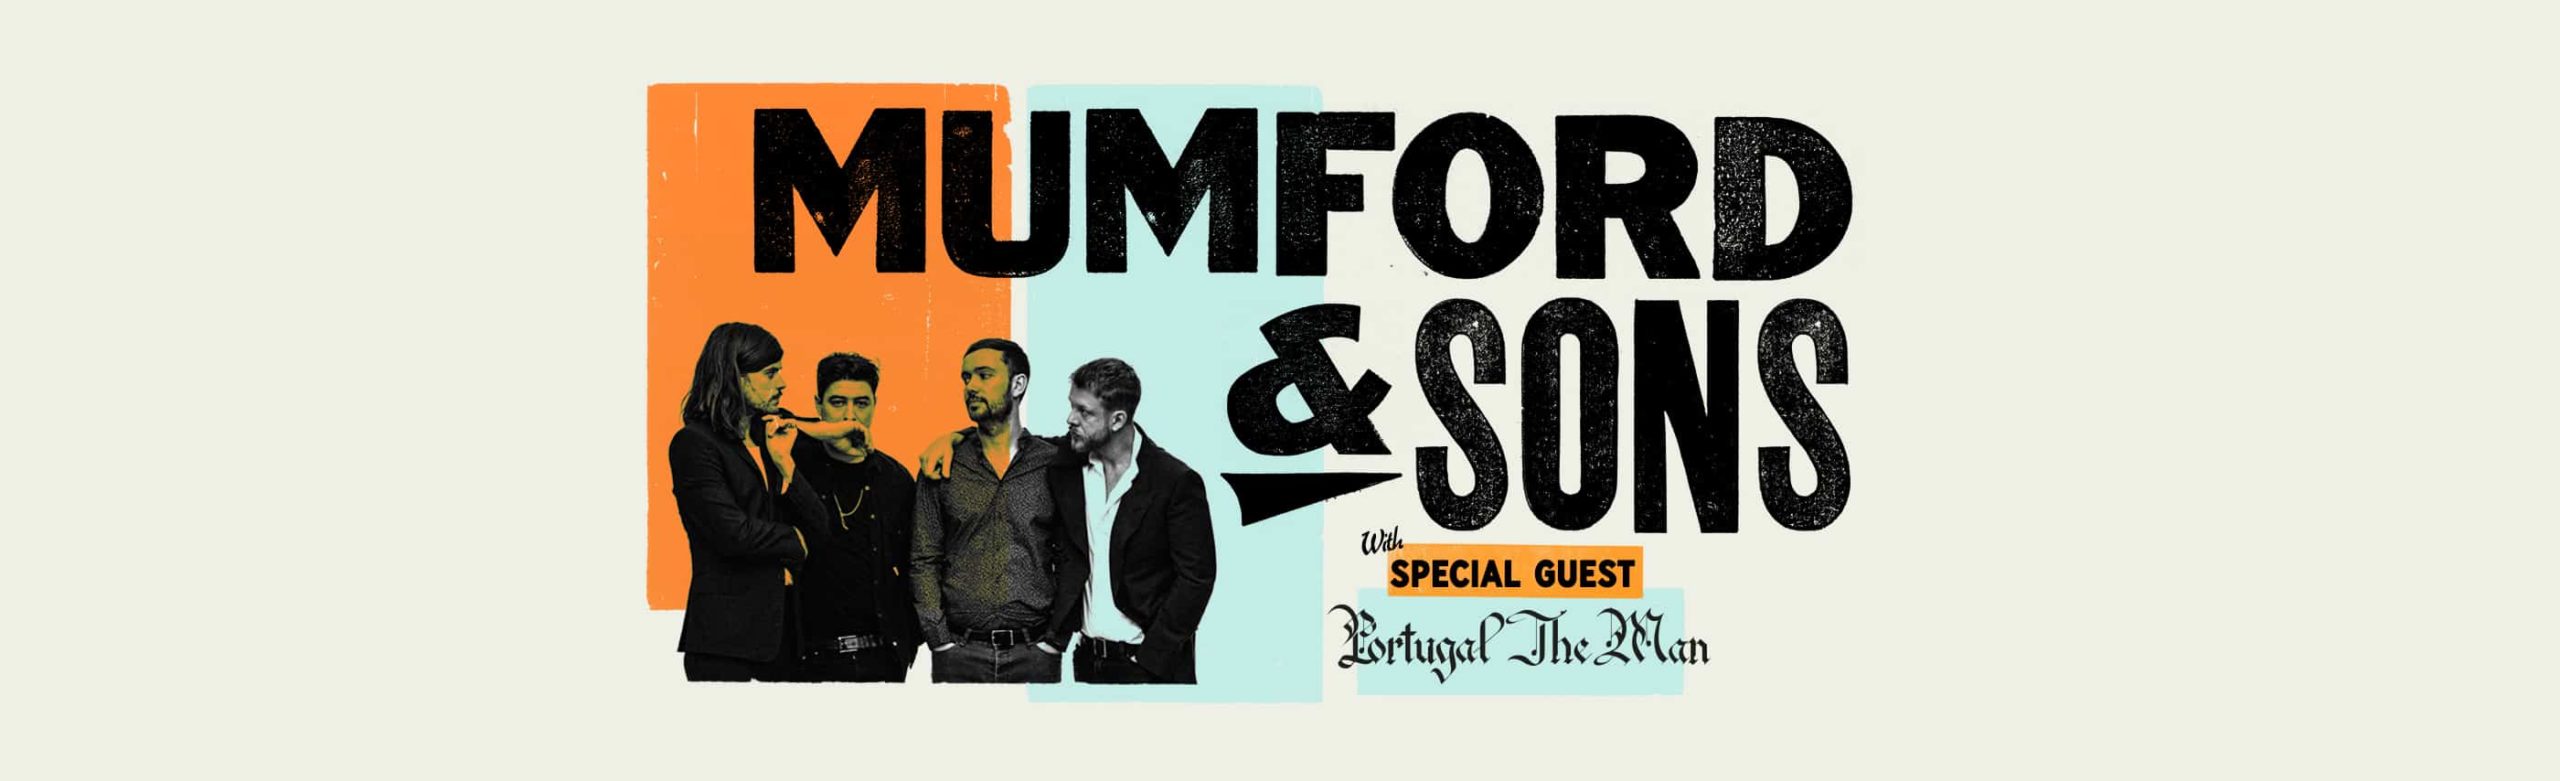 Limited Ticket Release: Mumford & Sons Image